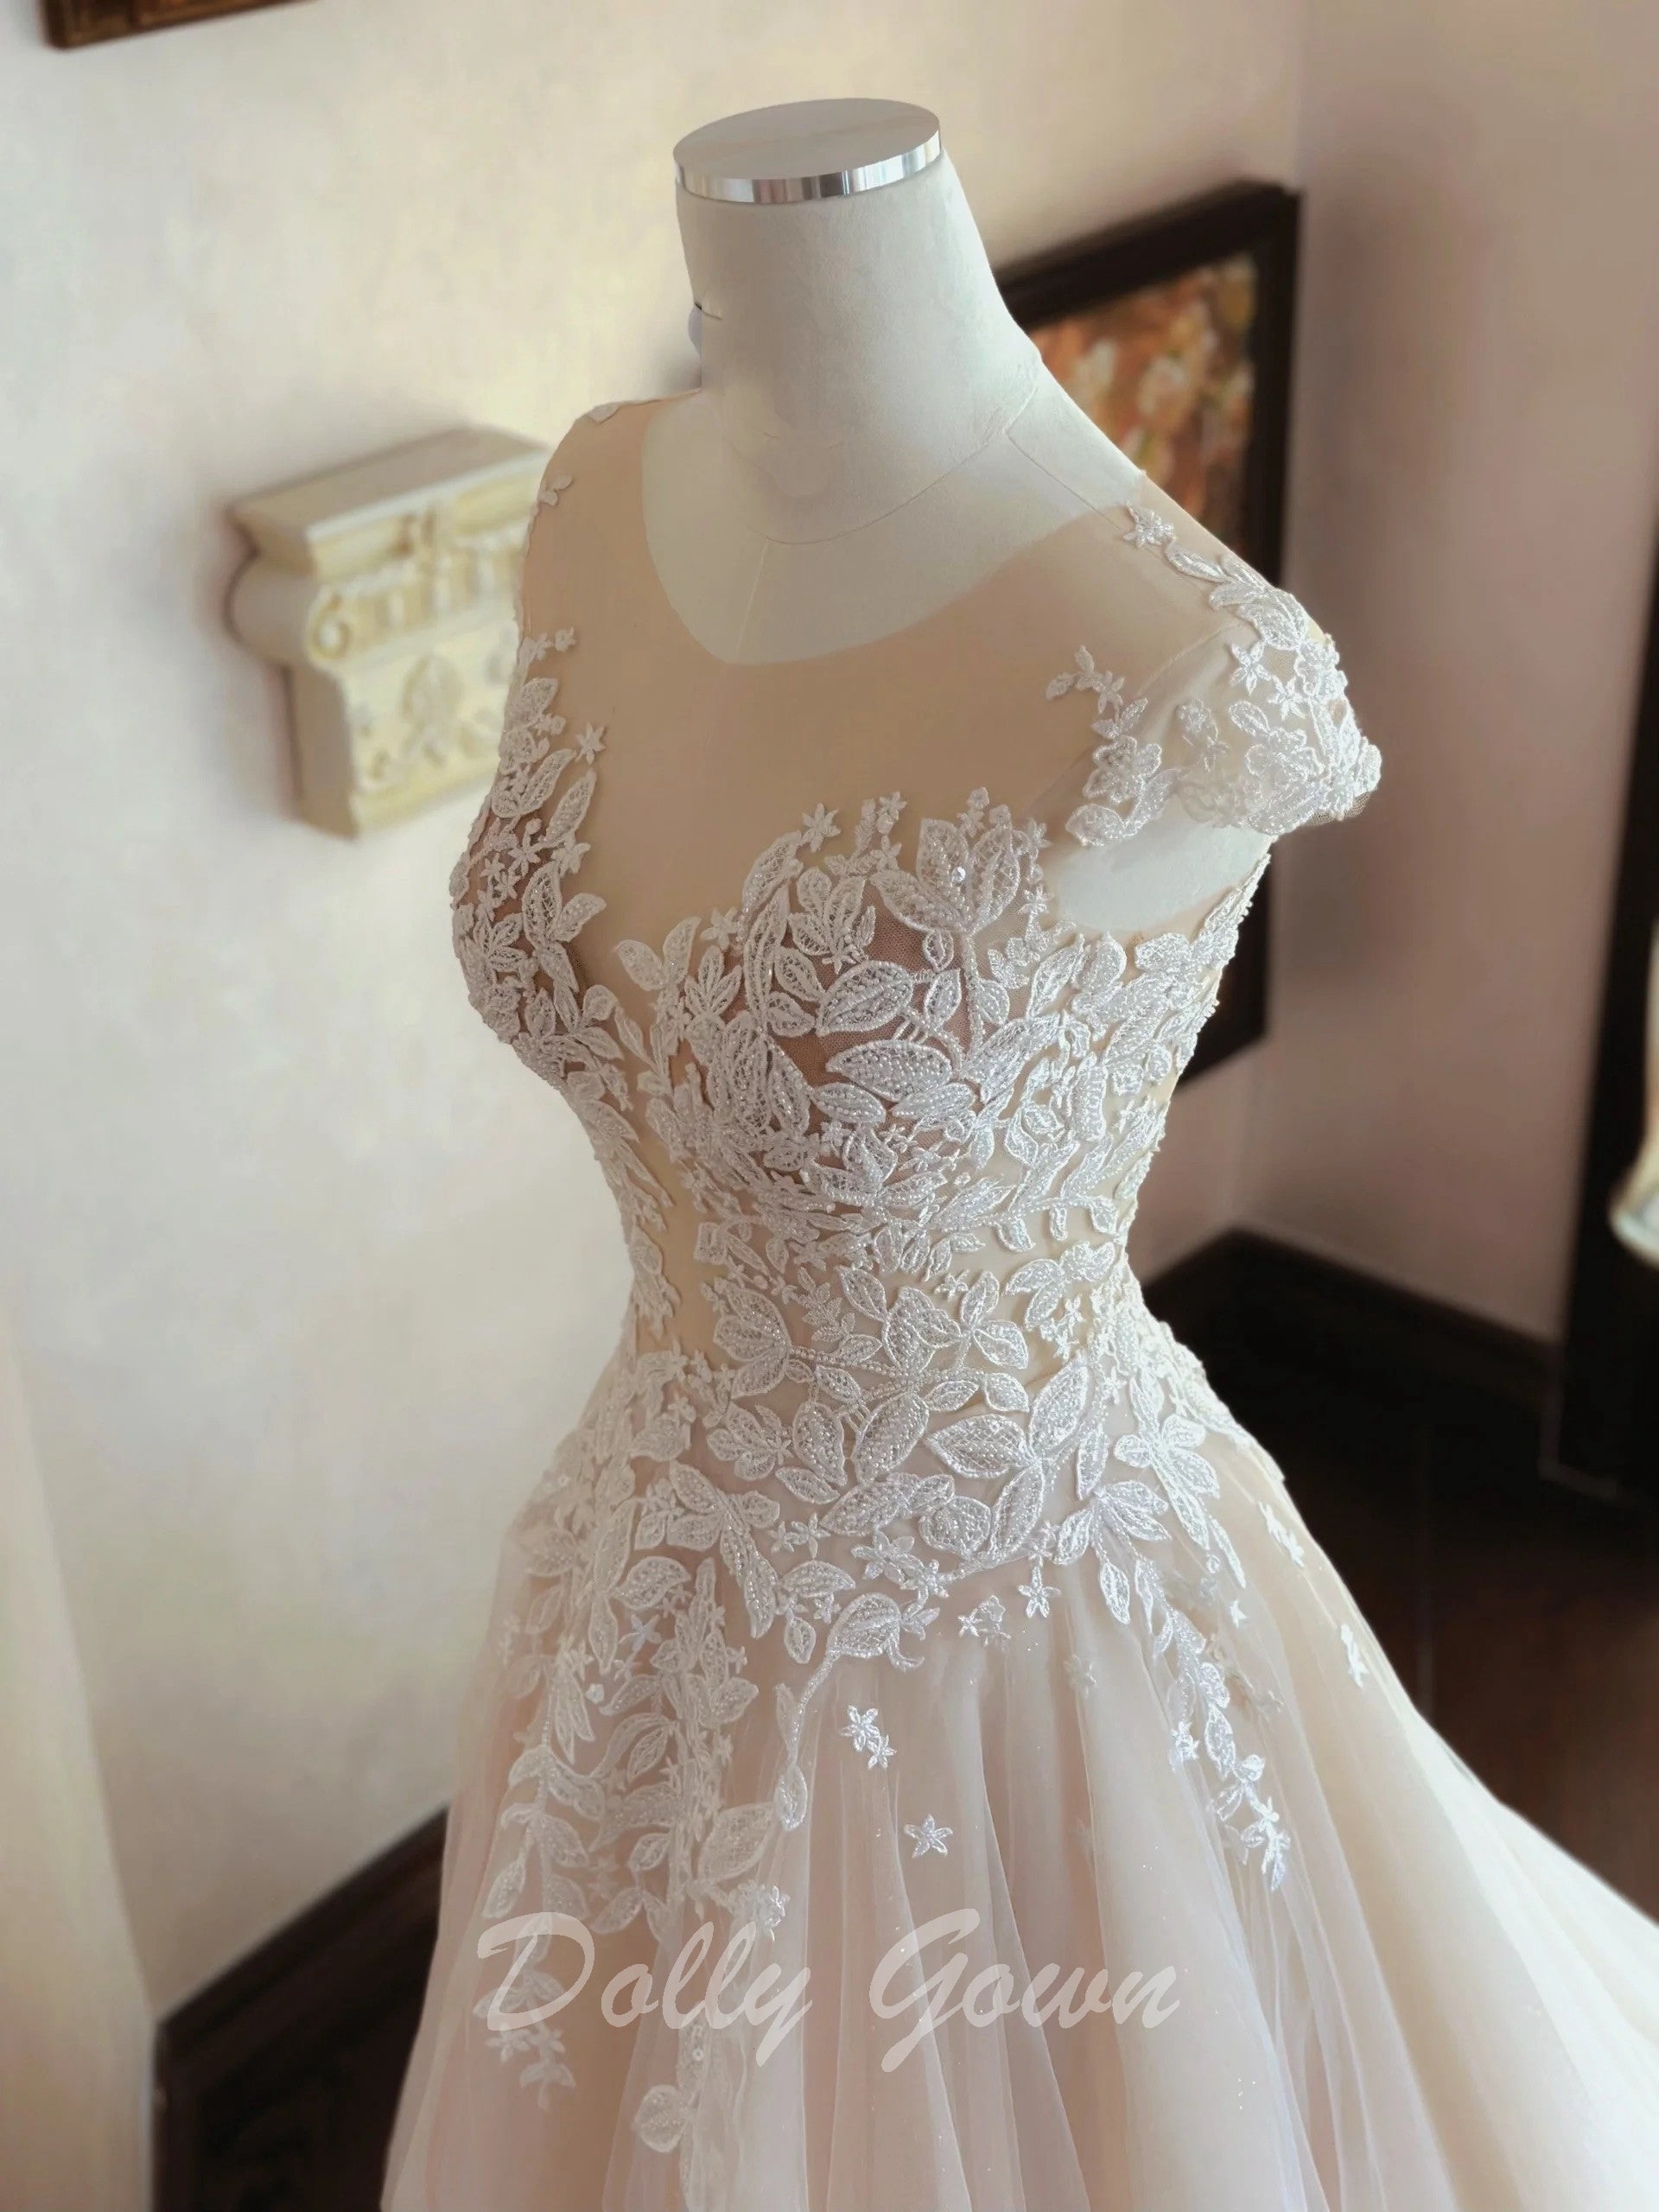 Elegant Lace Top See Through Summer Sheer Wedding Dress - DollyGown